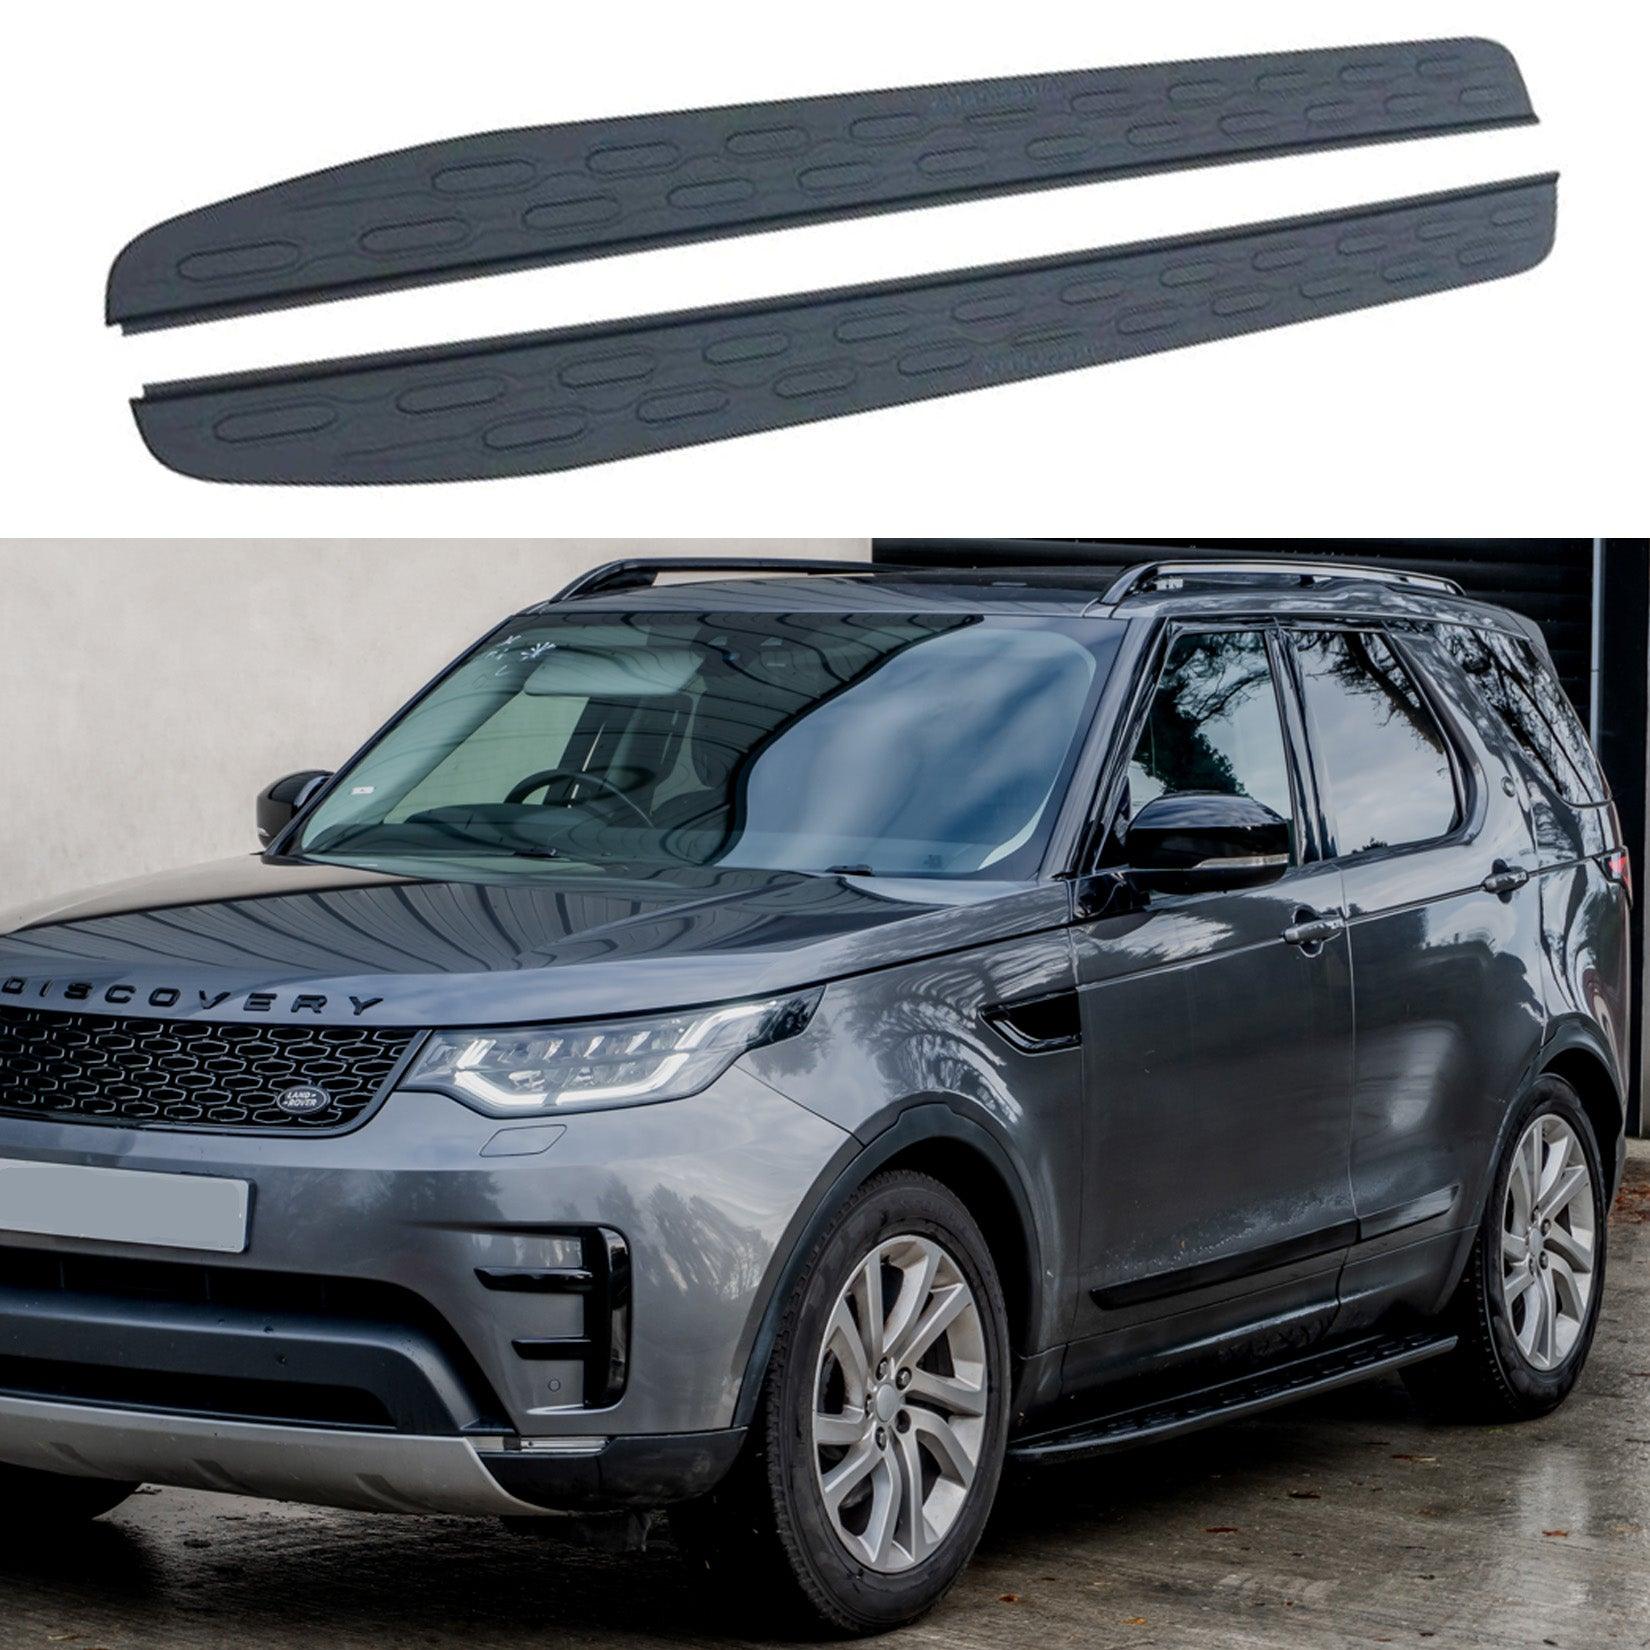 LAND ROVER DISCOVERY 5 2017 ON OEM STYLE SIDE STEPS RUNNING BOARDS - ALL BLACK - PAIR - Storm Xccessories